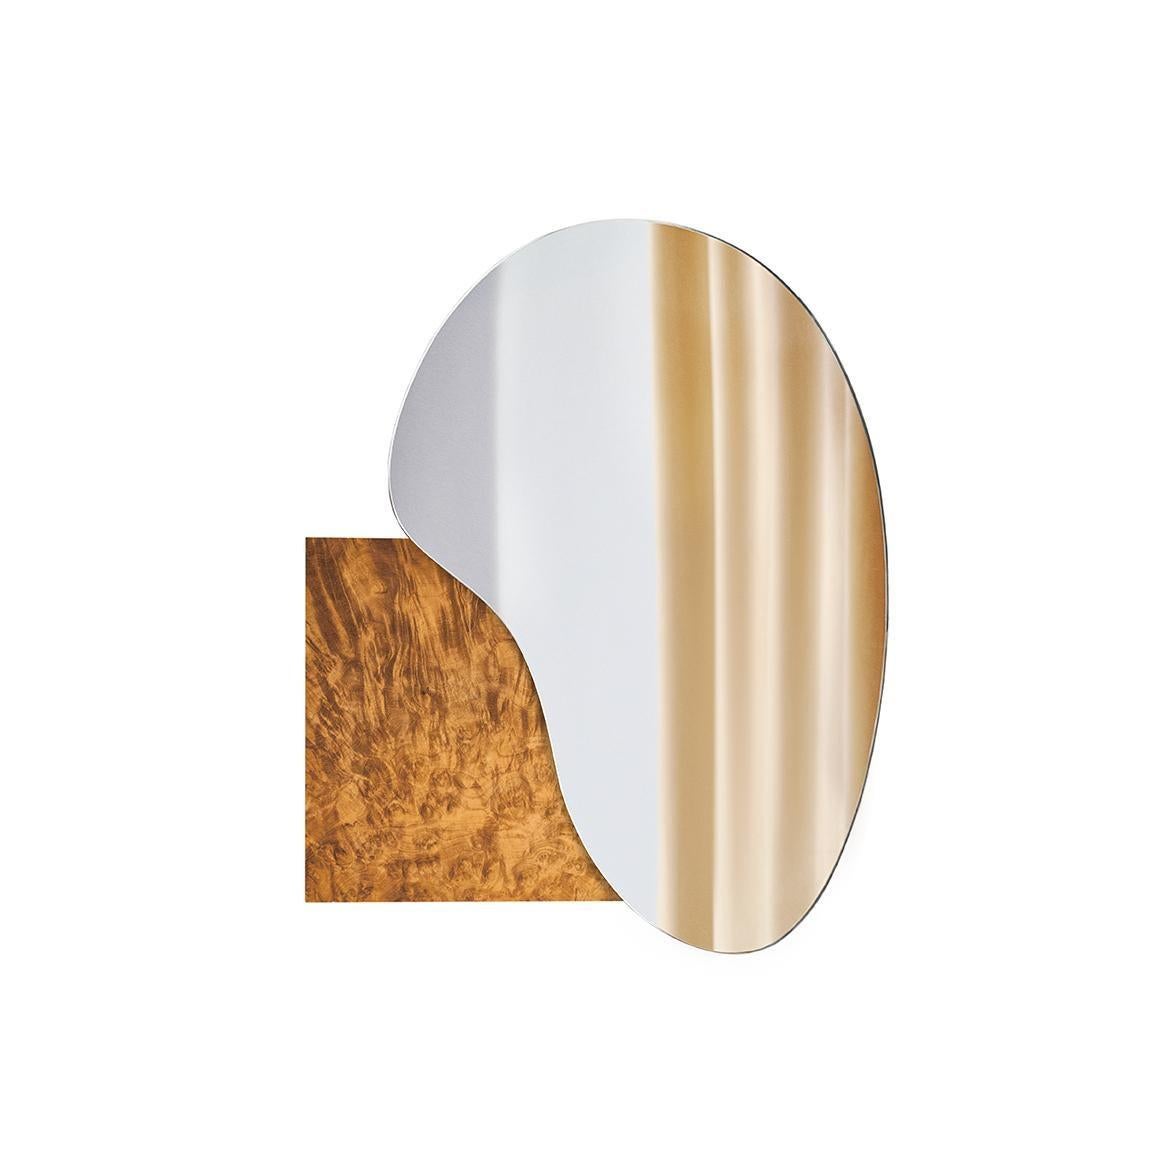 Organic Modern Contemporary Wall Mirror Lake 4 by Noom, Brushed Brass Frame For Sale